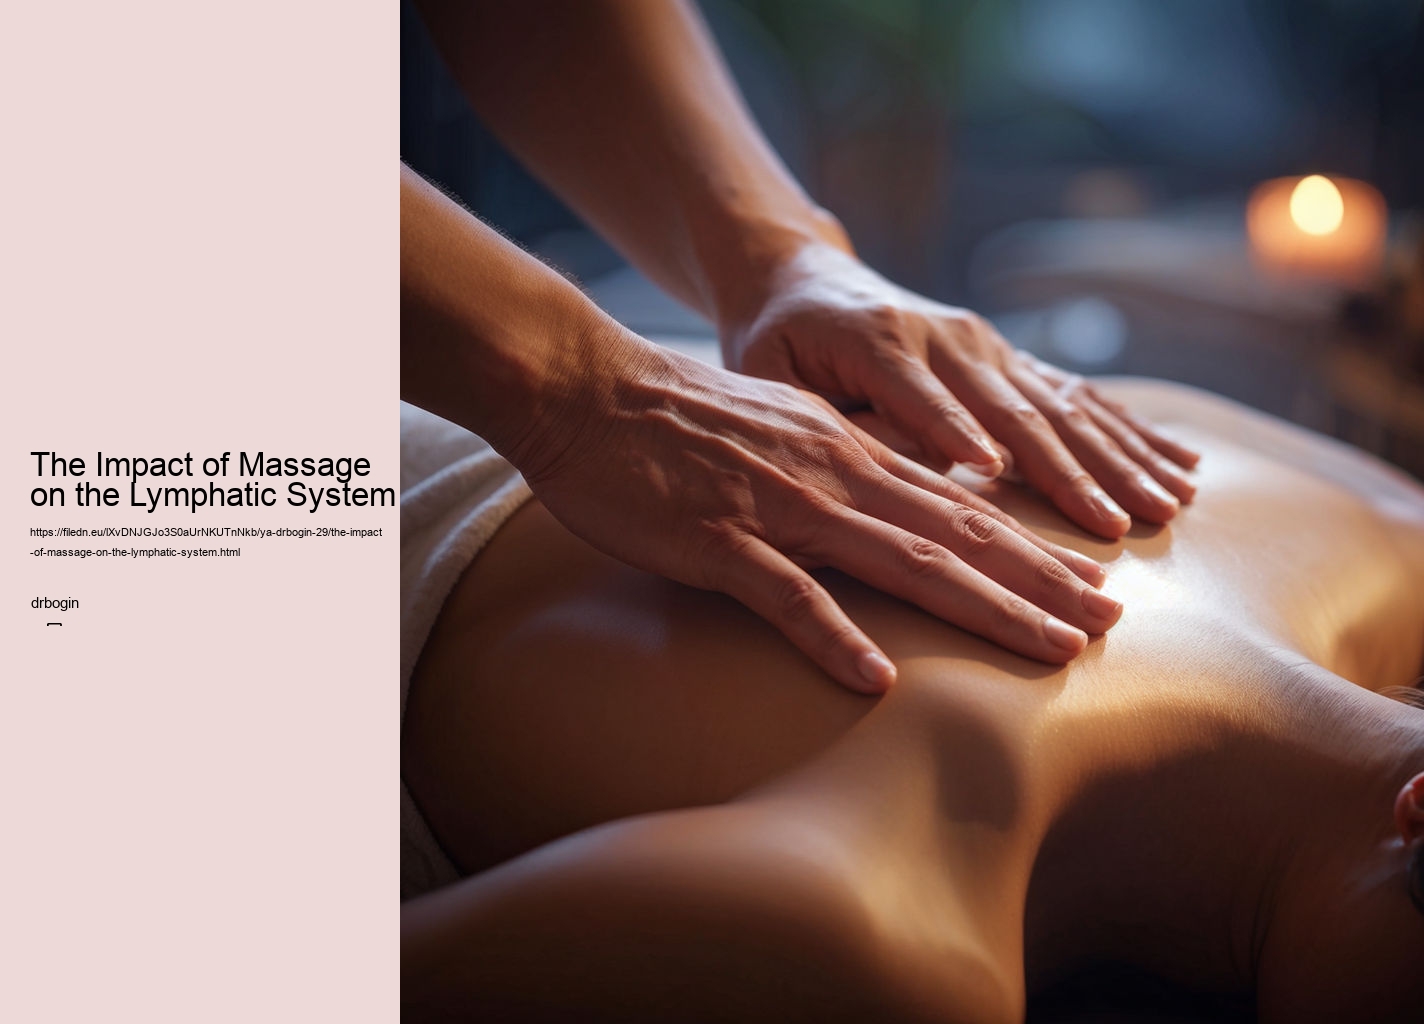 The Impact of Massage on the Lymphatic System